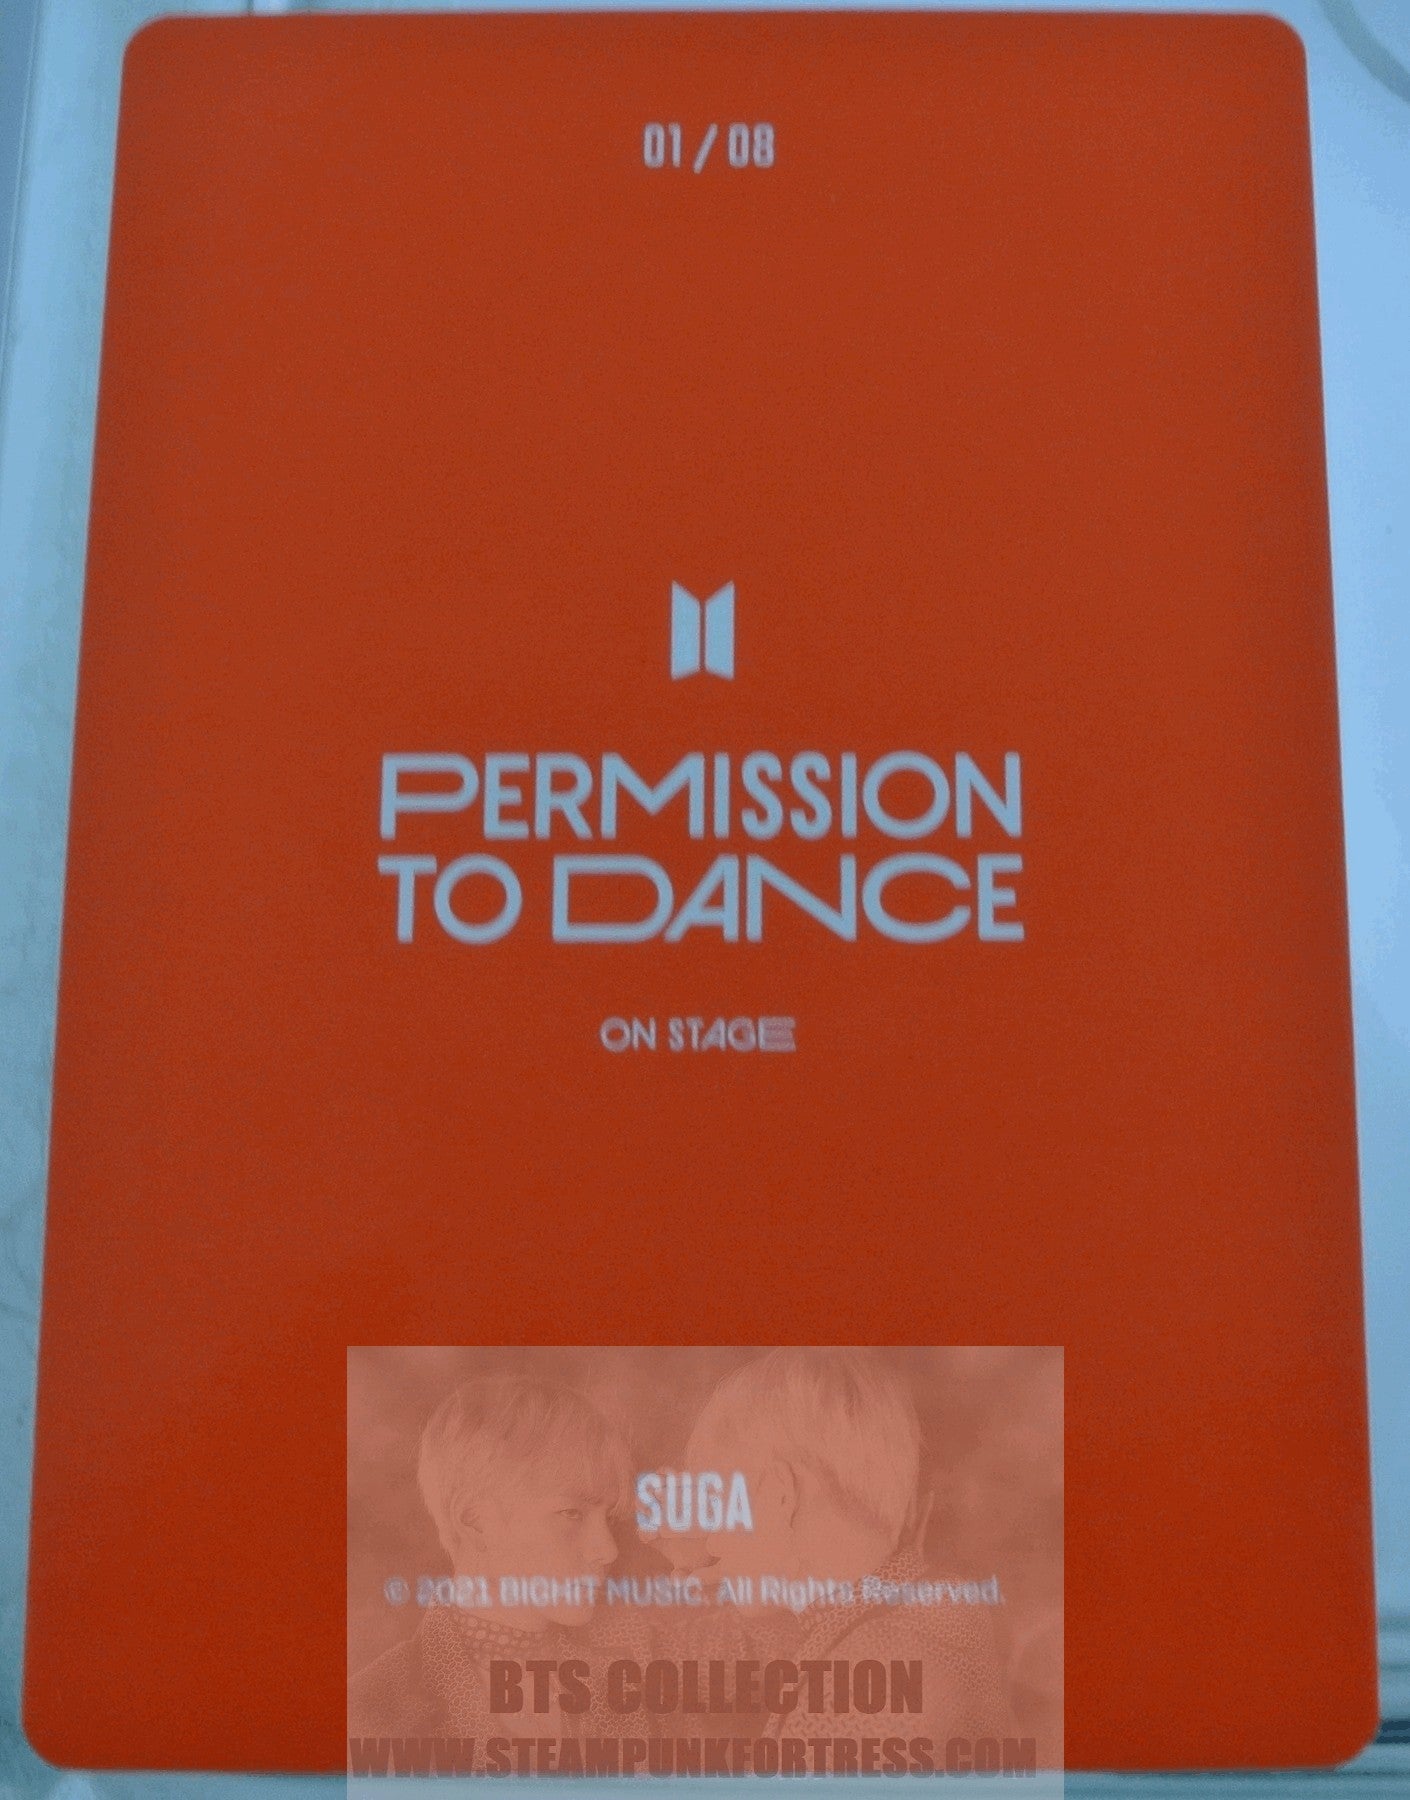 BTS SUGA MIN YOONGI YOON-GI PTD 2021 PERMISSION TO DANCE ON STAGE #1 OF 8 PHOTOCARD PHOTO CARD NEW OFFICIAL MERCHANDISE